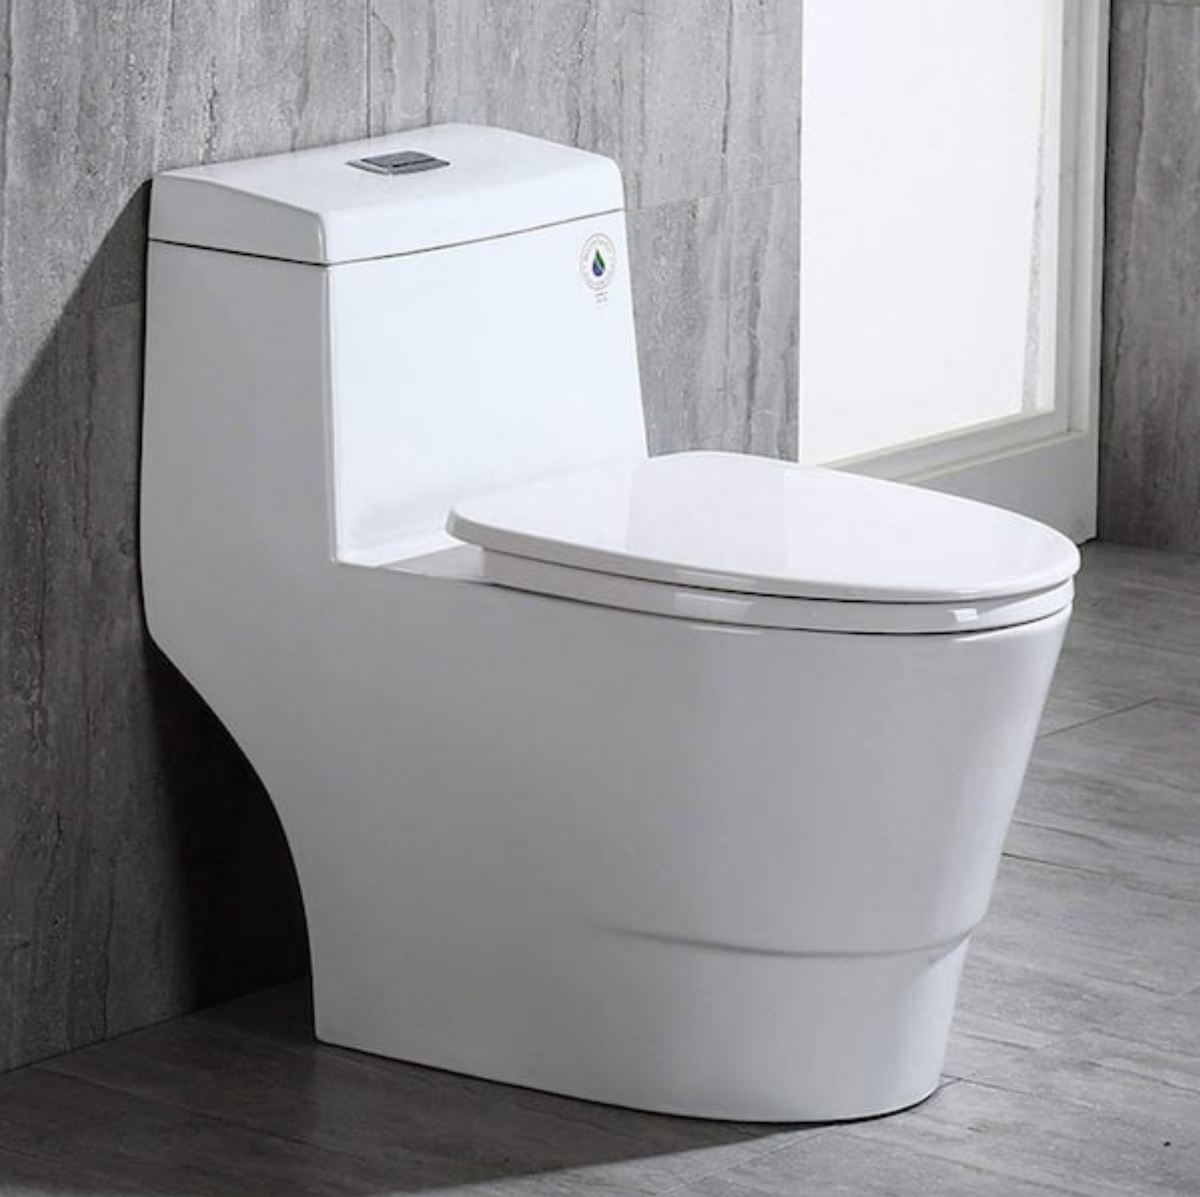 A grey bathroom has a WOODBRIDGE Bristol 1-piece 1.6-GPF high-efficiency elongated all-in-one toilet with soft-close seat.